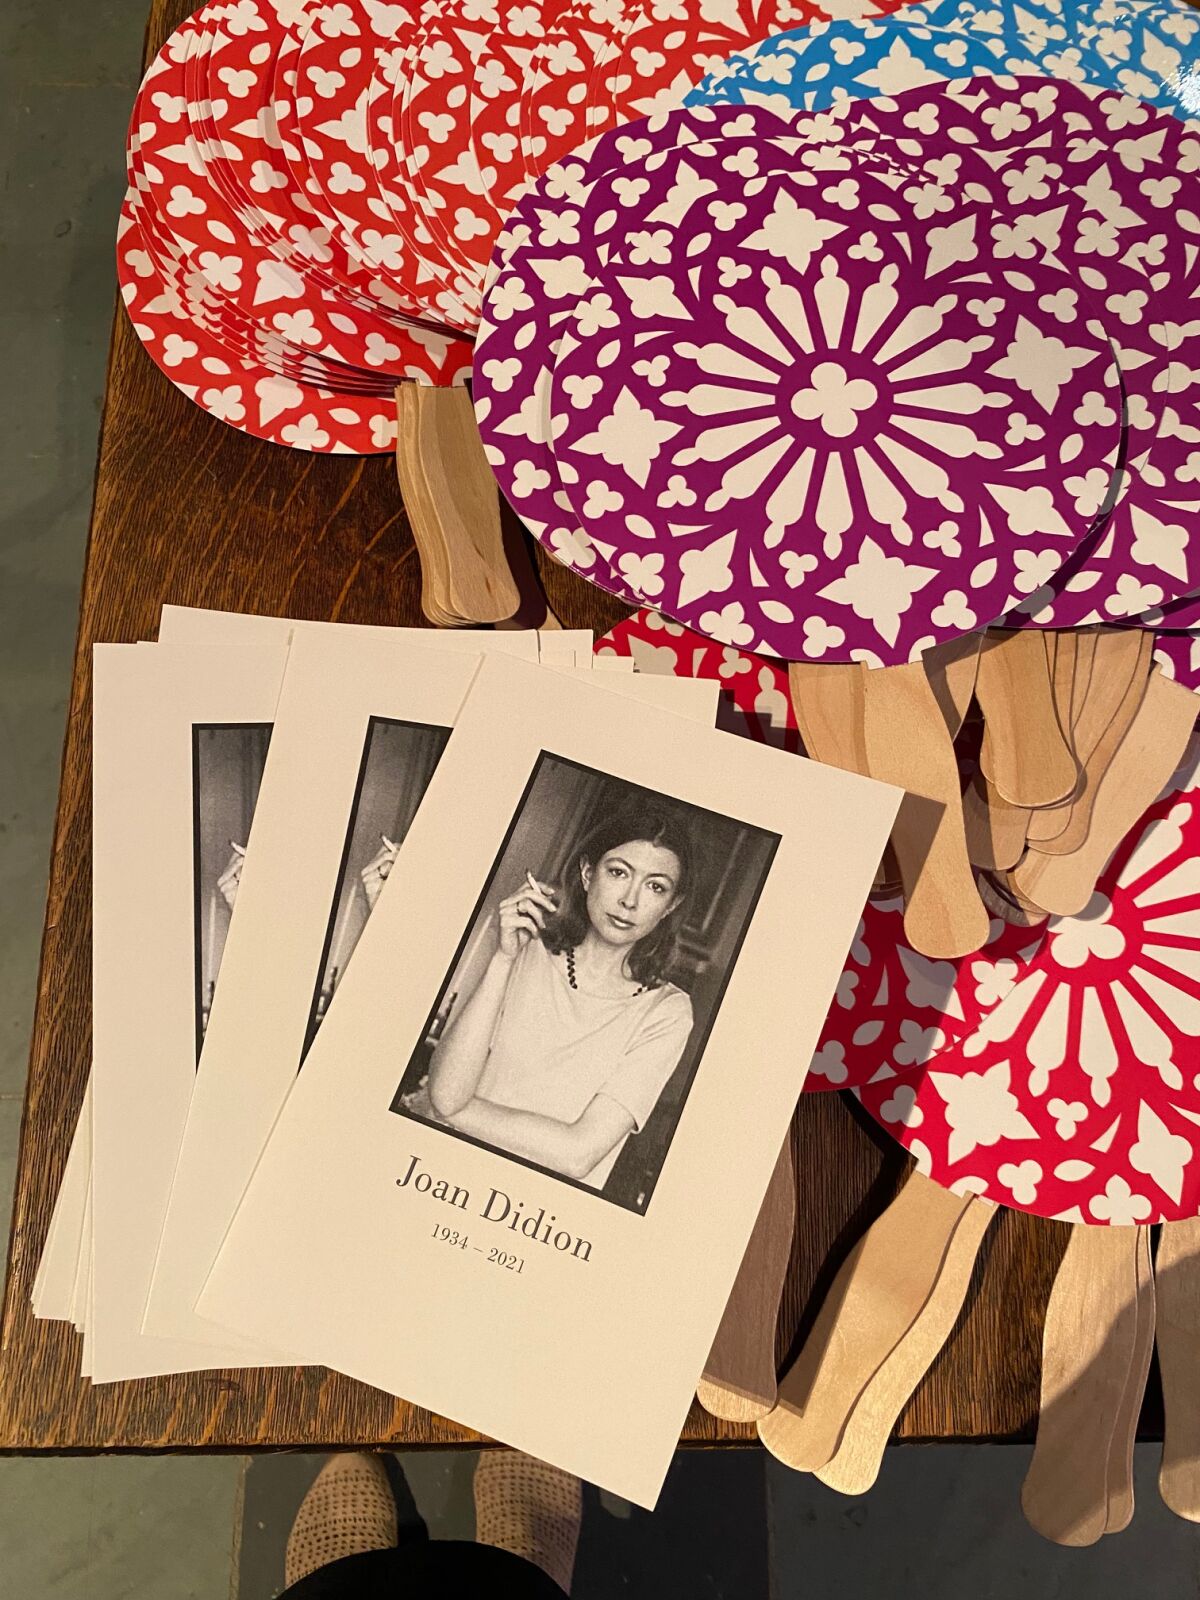 A selection of programs and hand fans at the Joan Didion memorial service in New York on Wednesday.